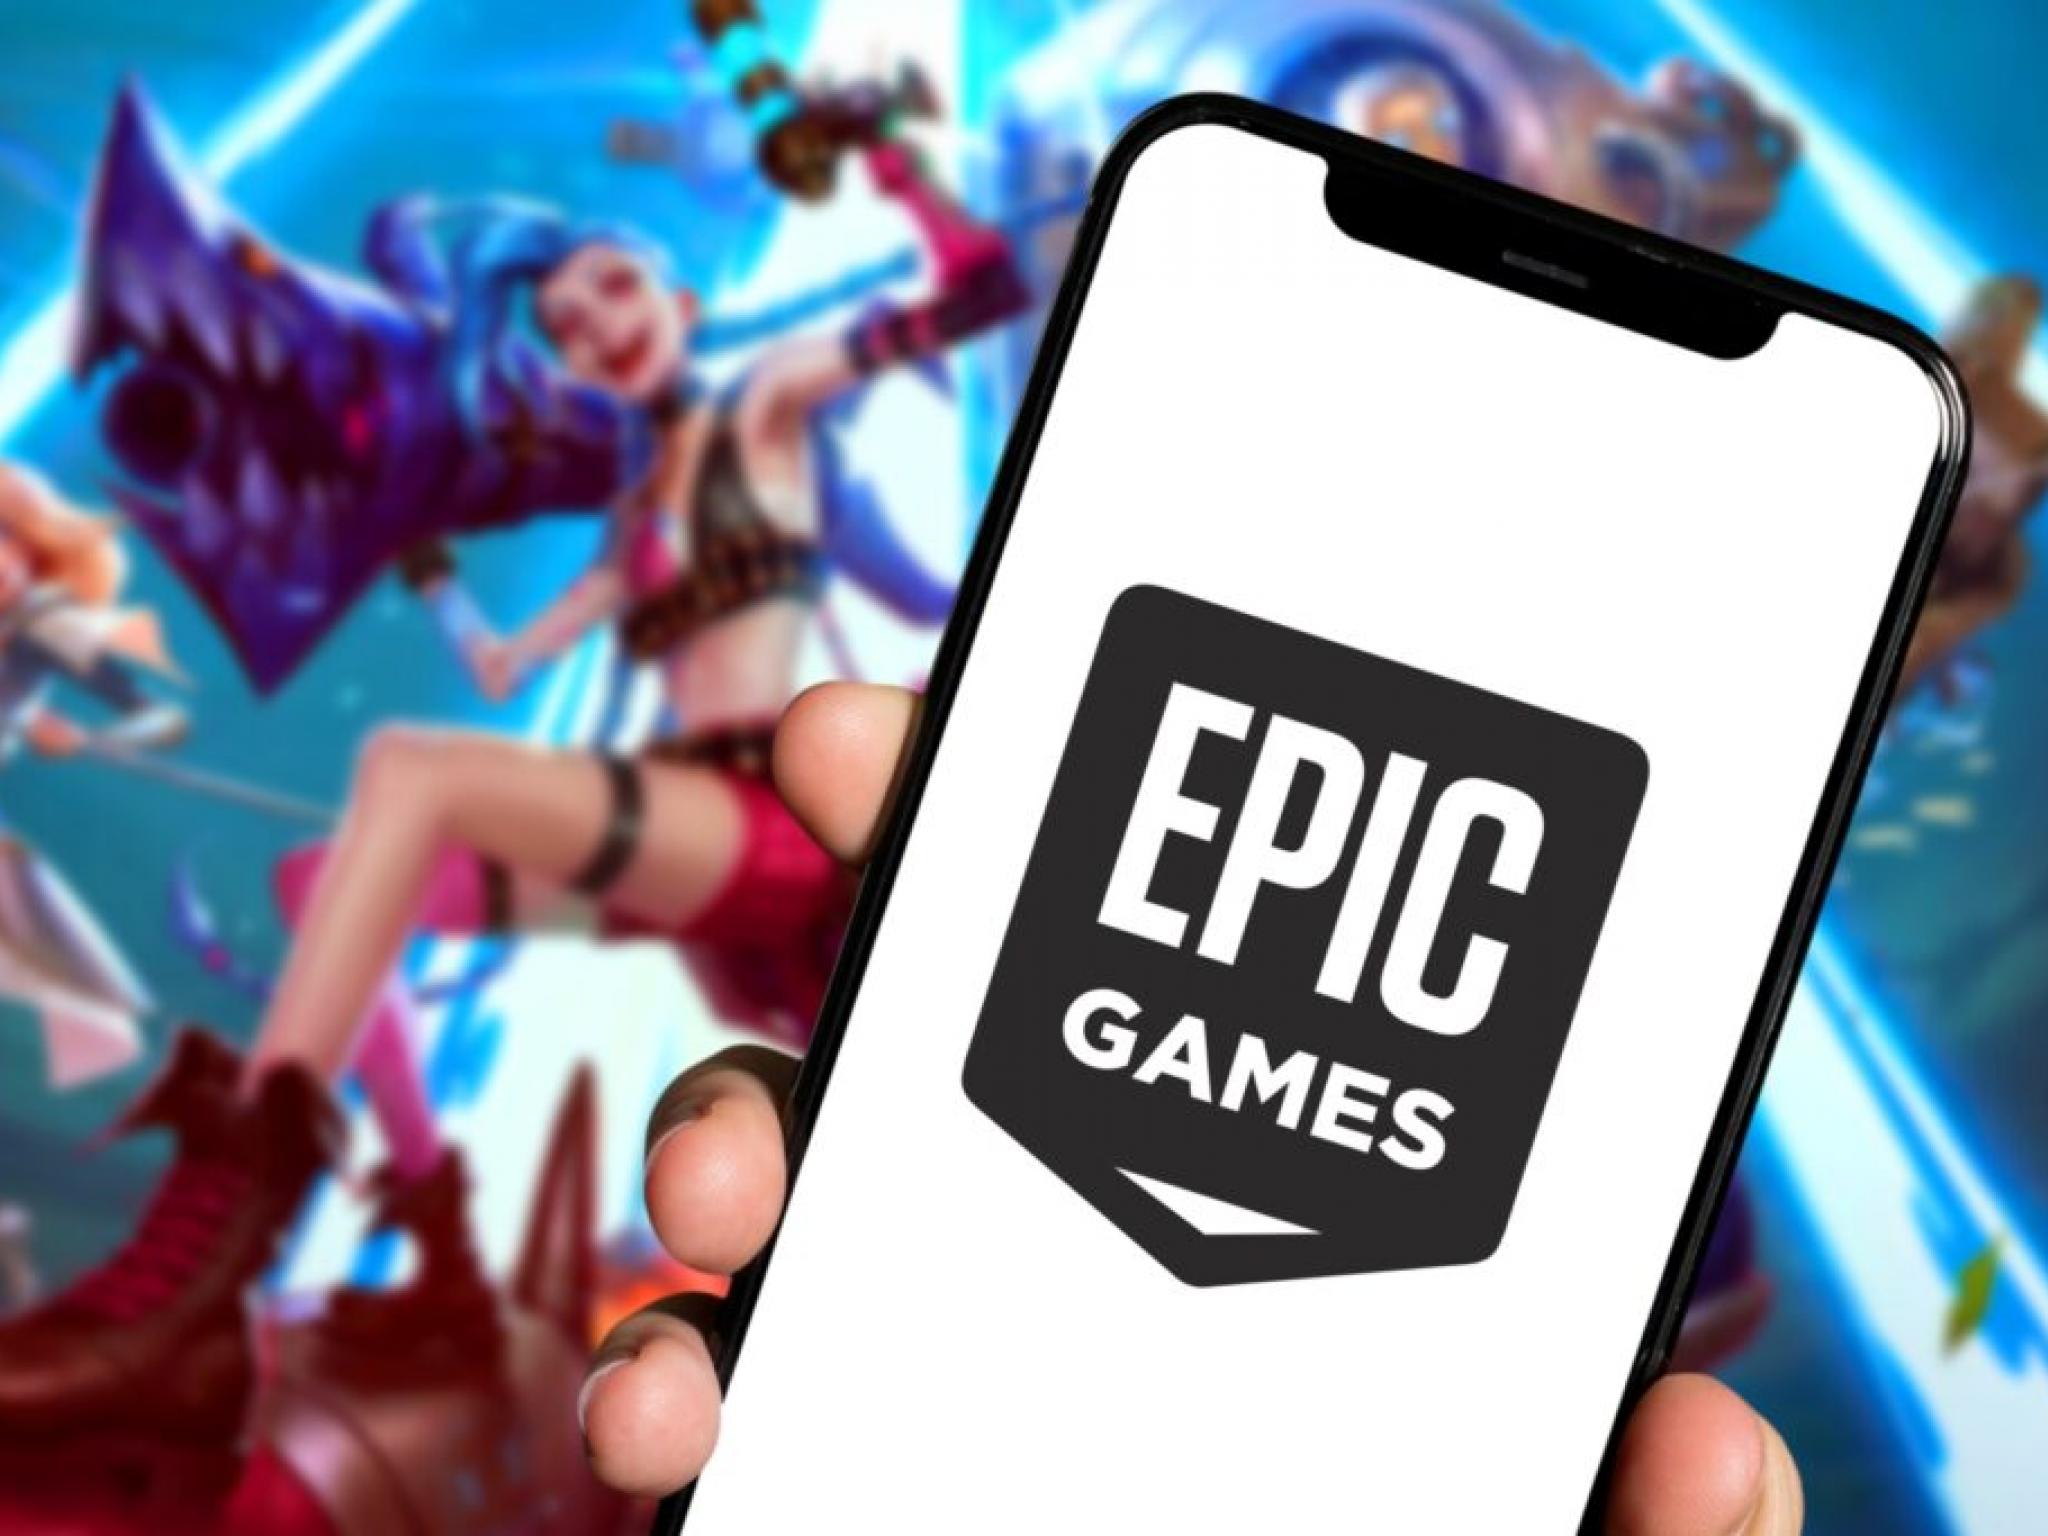  apple-approves-epic-games-marketplace-app-in-europe-amid-ongoing-feud 